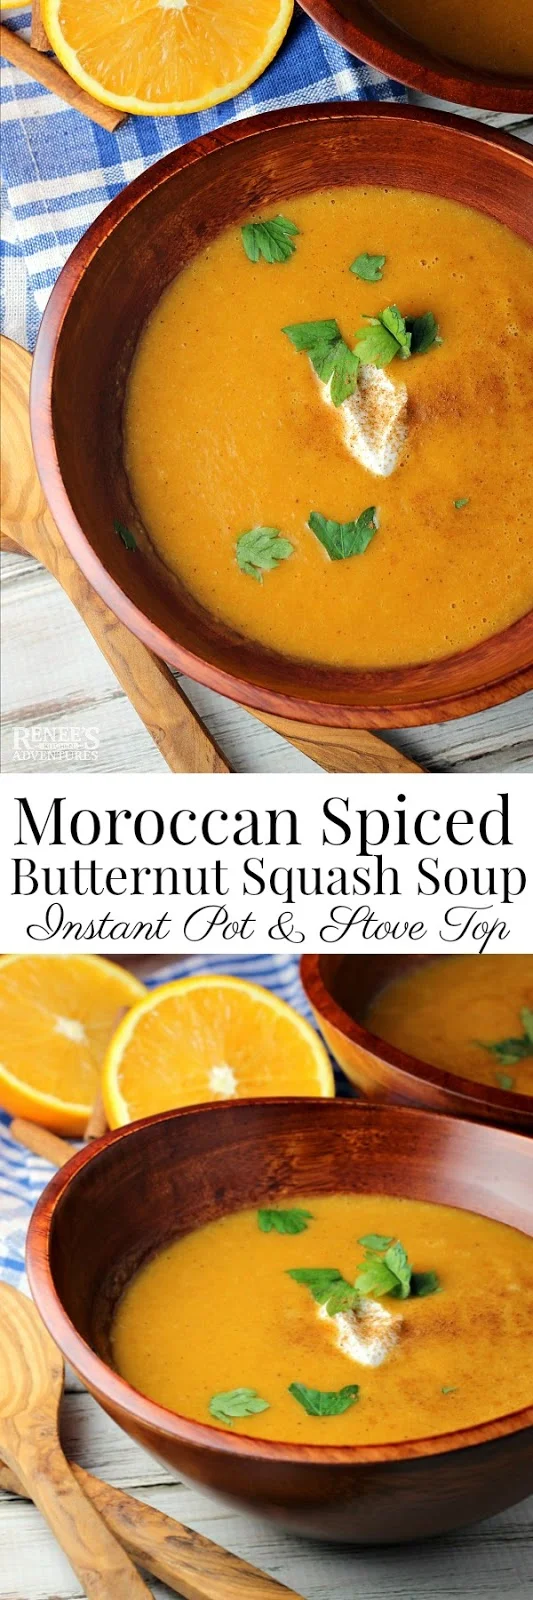 Instant Pot Moroccan Spiced Butternut Squash Soup - Renee's Kitchen Adventures - easy #weightwatchers #soup #recipe made in your #Instantpot So flavorful, you won't believe you're eating #healthy! 